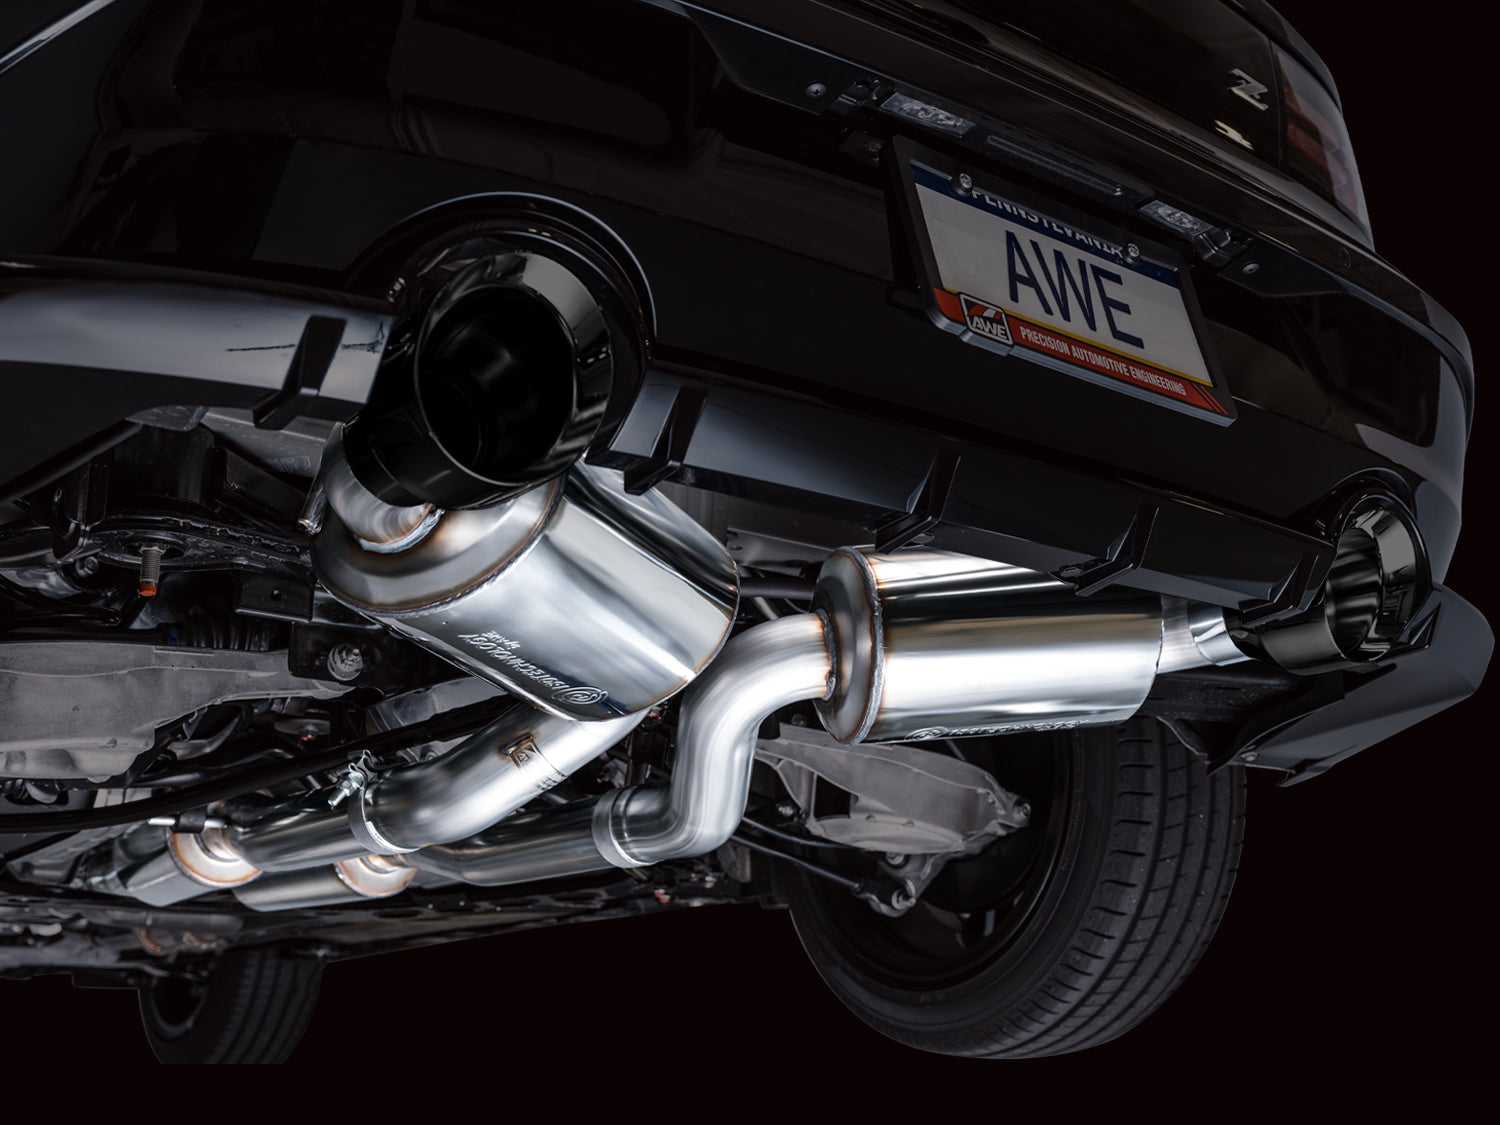 AWE EXHAUST SUITE FOR THE NISSAN Z